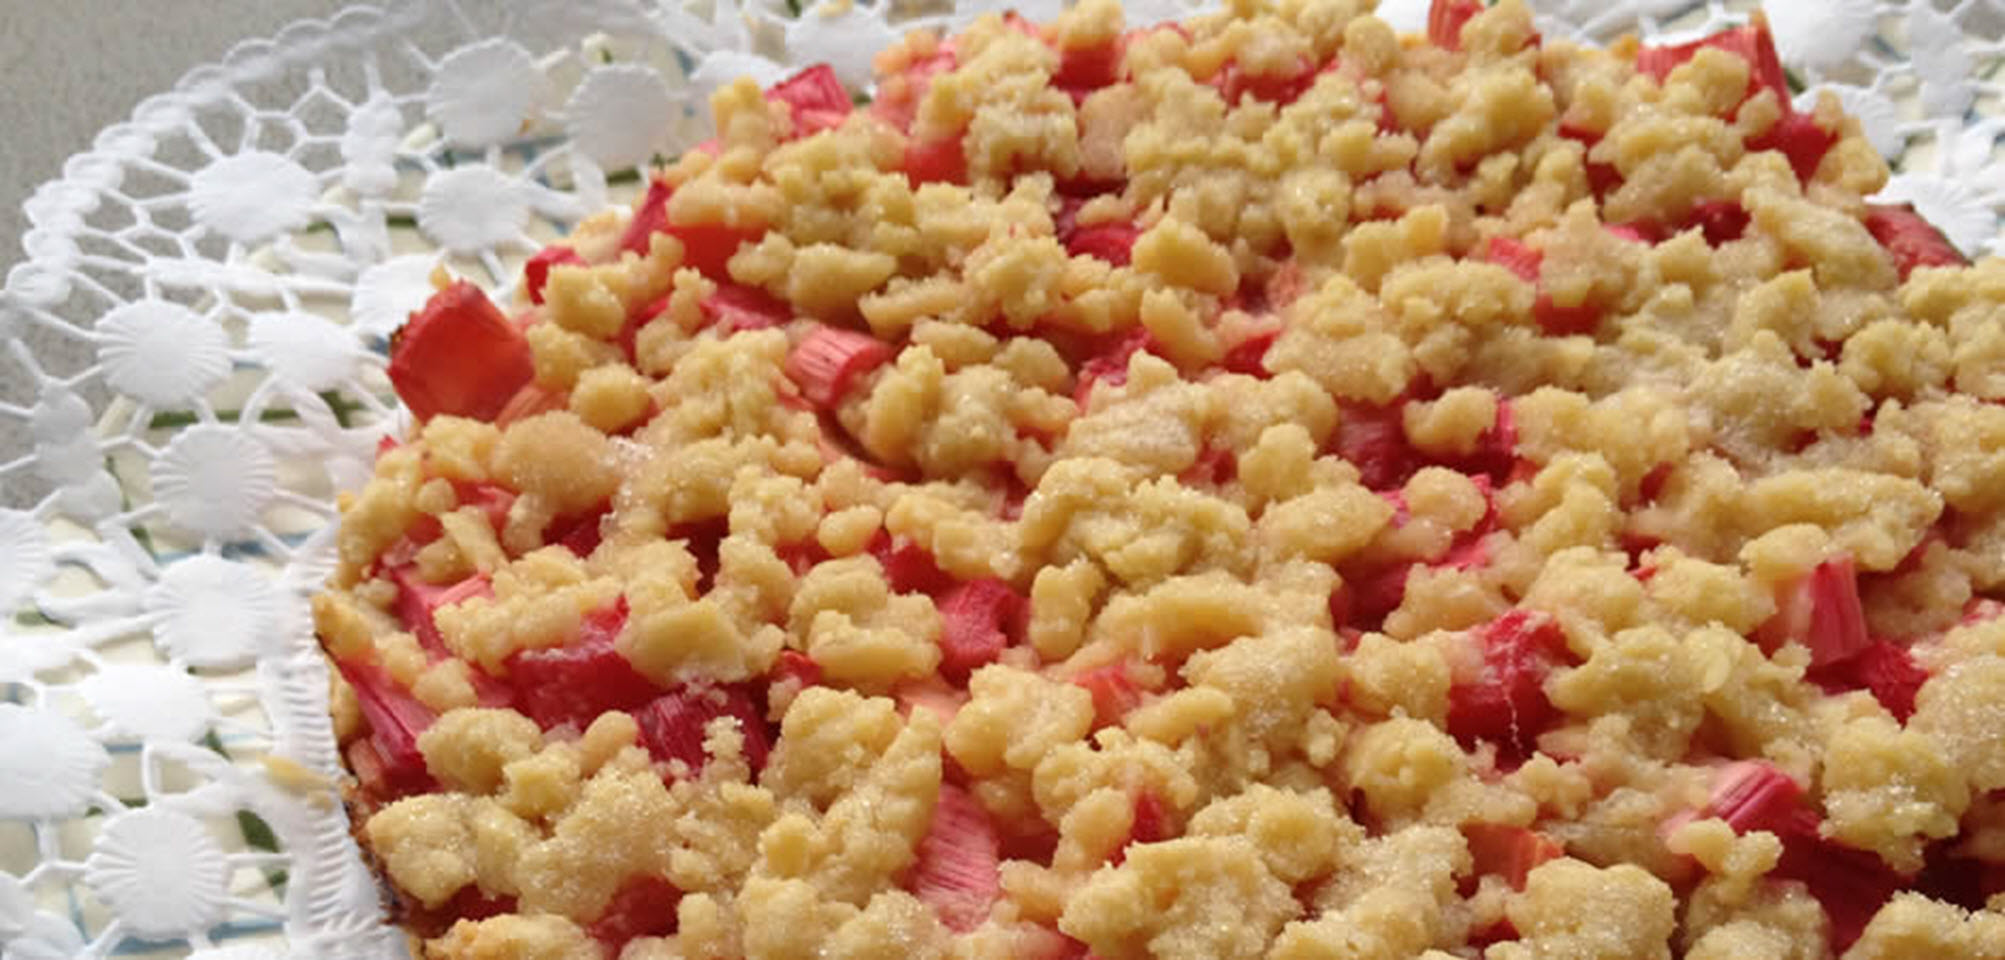 <p>Germans really love their streusel &mdash; and by streusel we don't mean itsy bitsy crumbles but large, chunky, crunchy streusel! There is virtually no German cake with fruit of which there isn't a variation with streusel topping. Rhubarb streusel cake is especially popular because rhubarb on its own is very tart and it's only the sweet streusel that makes it the treat that it is. Interestingly, it was only after the price of sugar dropped and was no longer a luxury that rhubarb gained popularity in Germany and found its way into streusel and cakes alike.</p>
                          